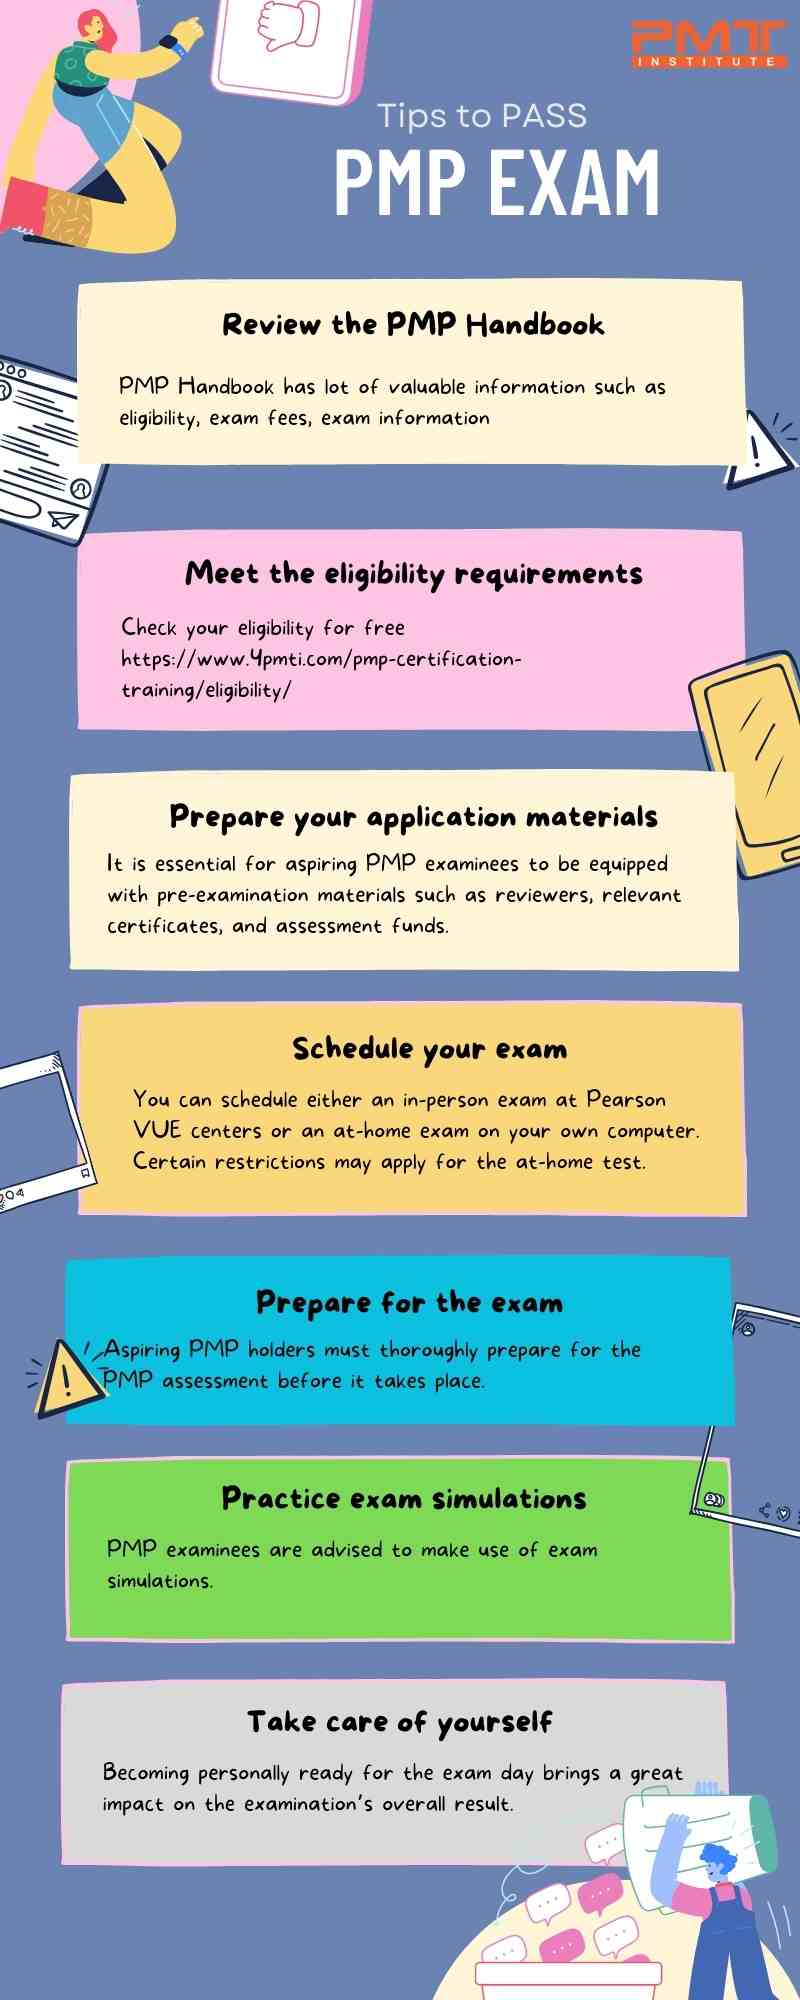 tips to apply for pmp exam